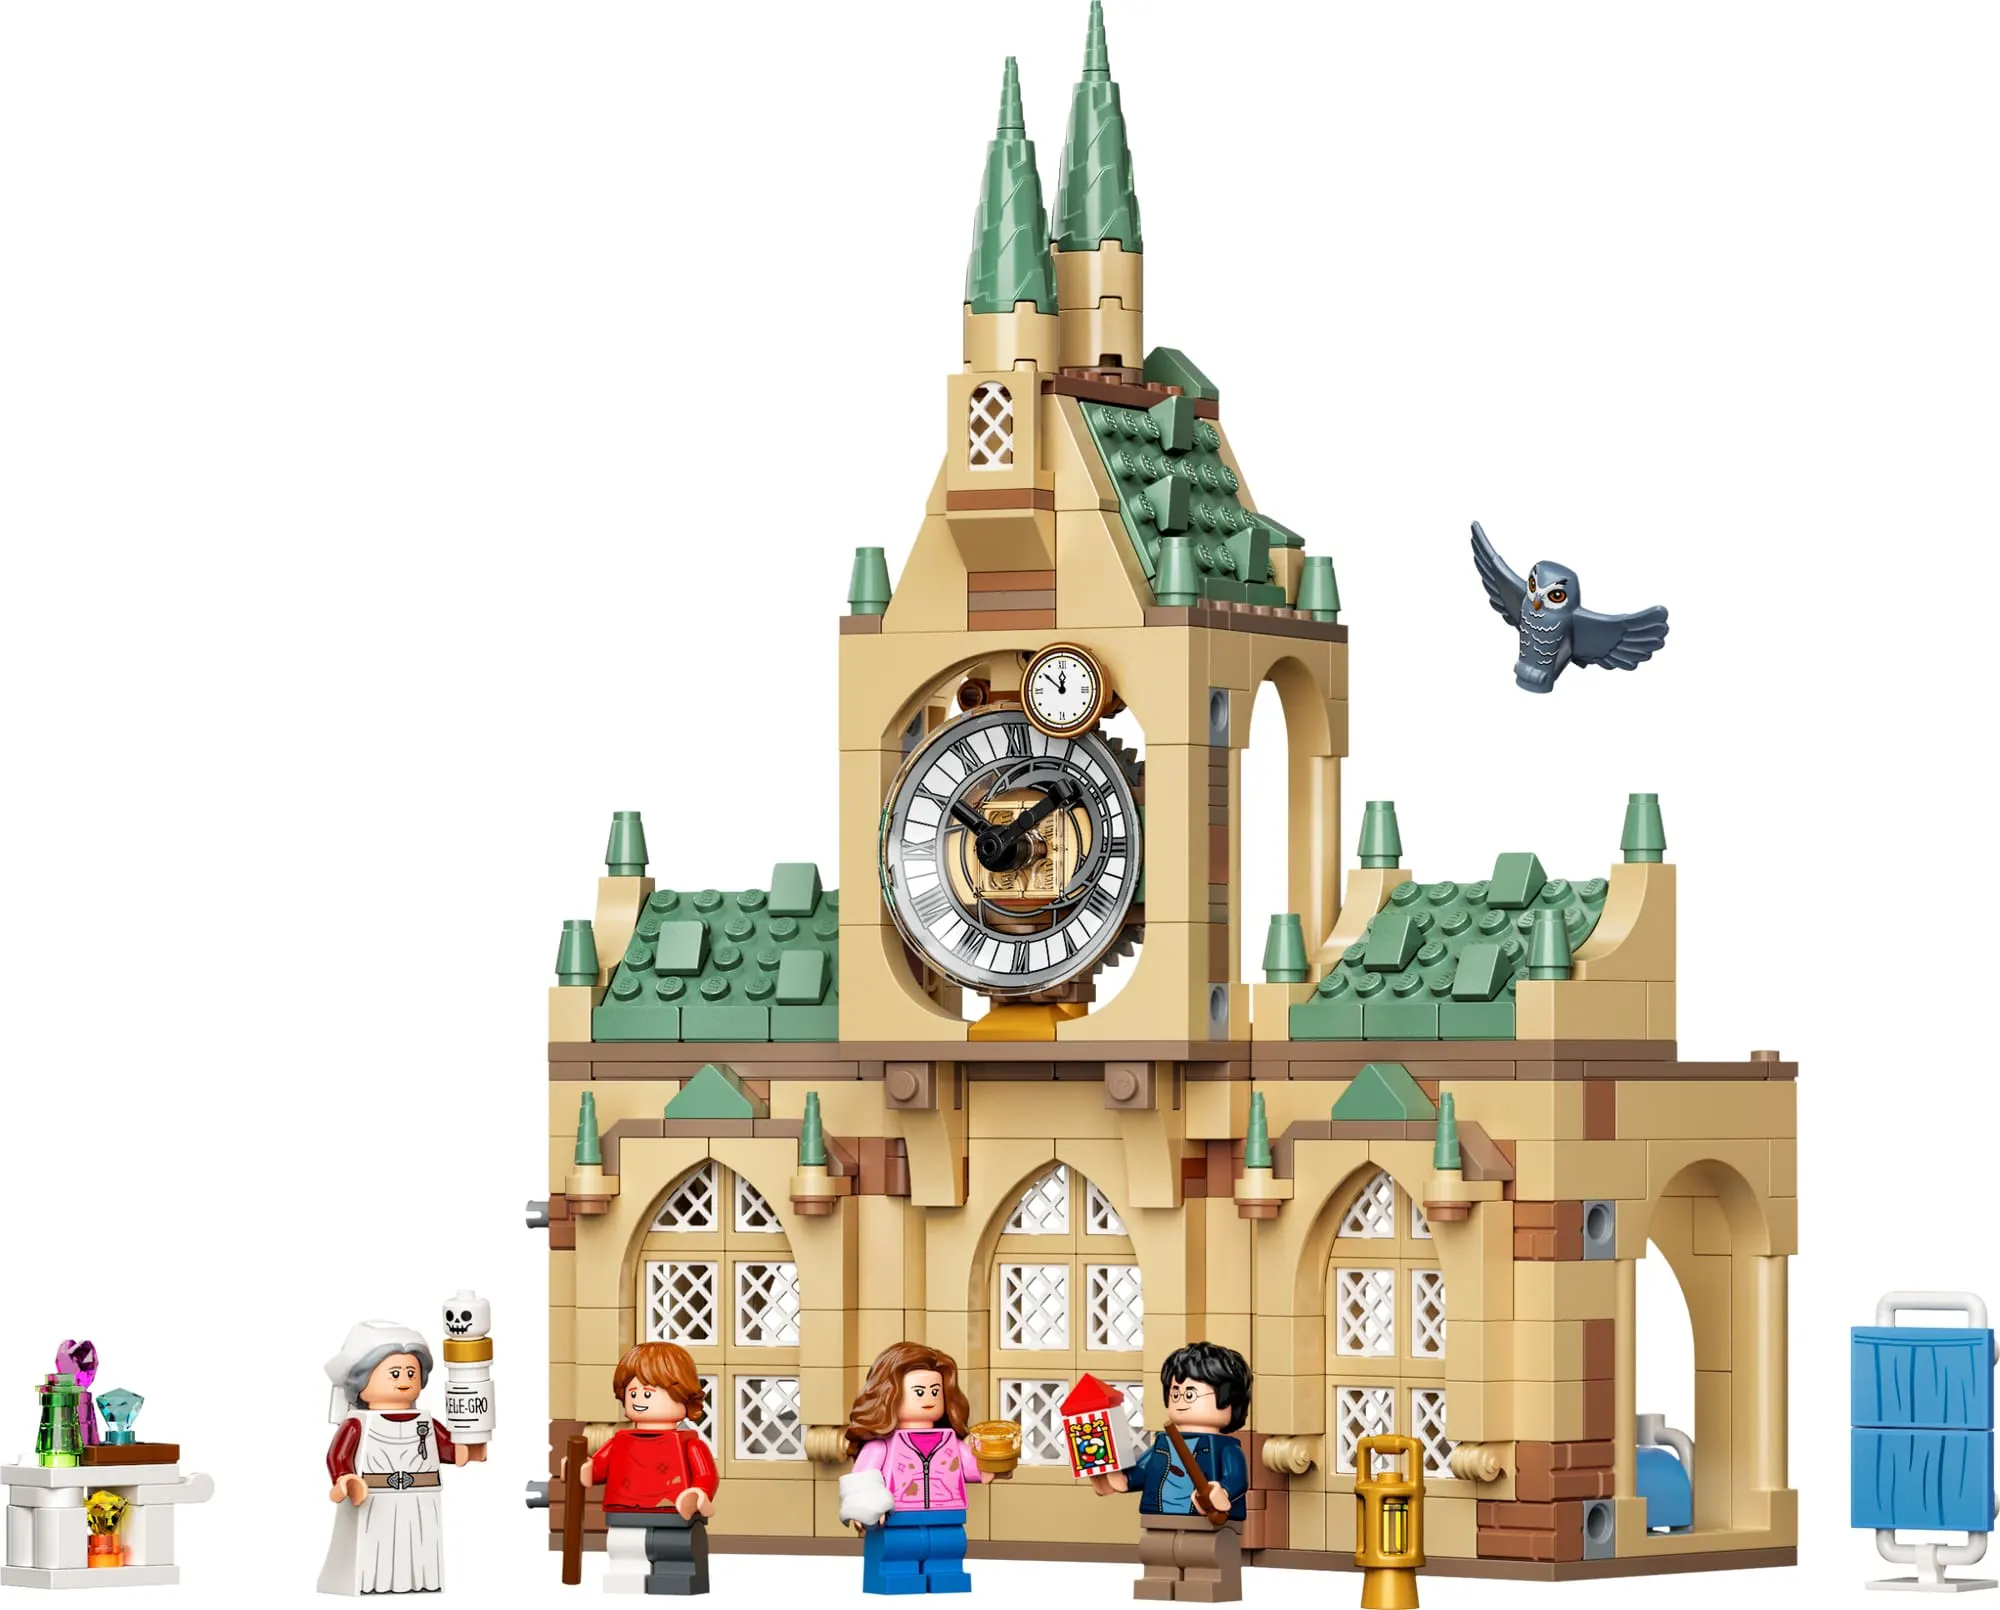 LEGO Harry Potter New Products for March. 1st 2022 | Hospital, Books and more